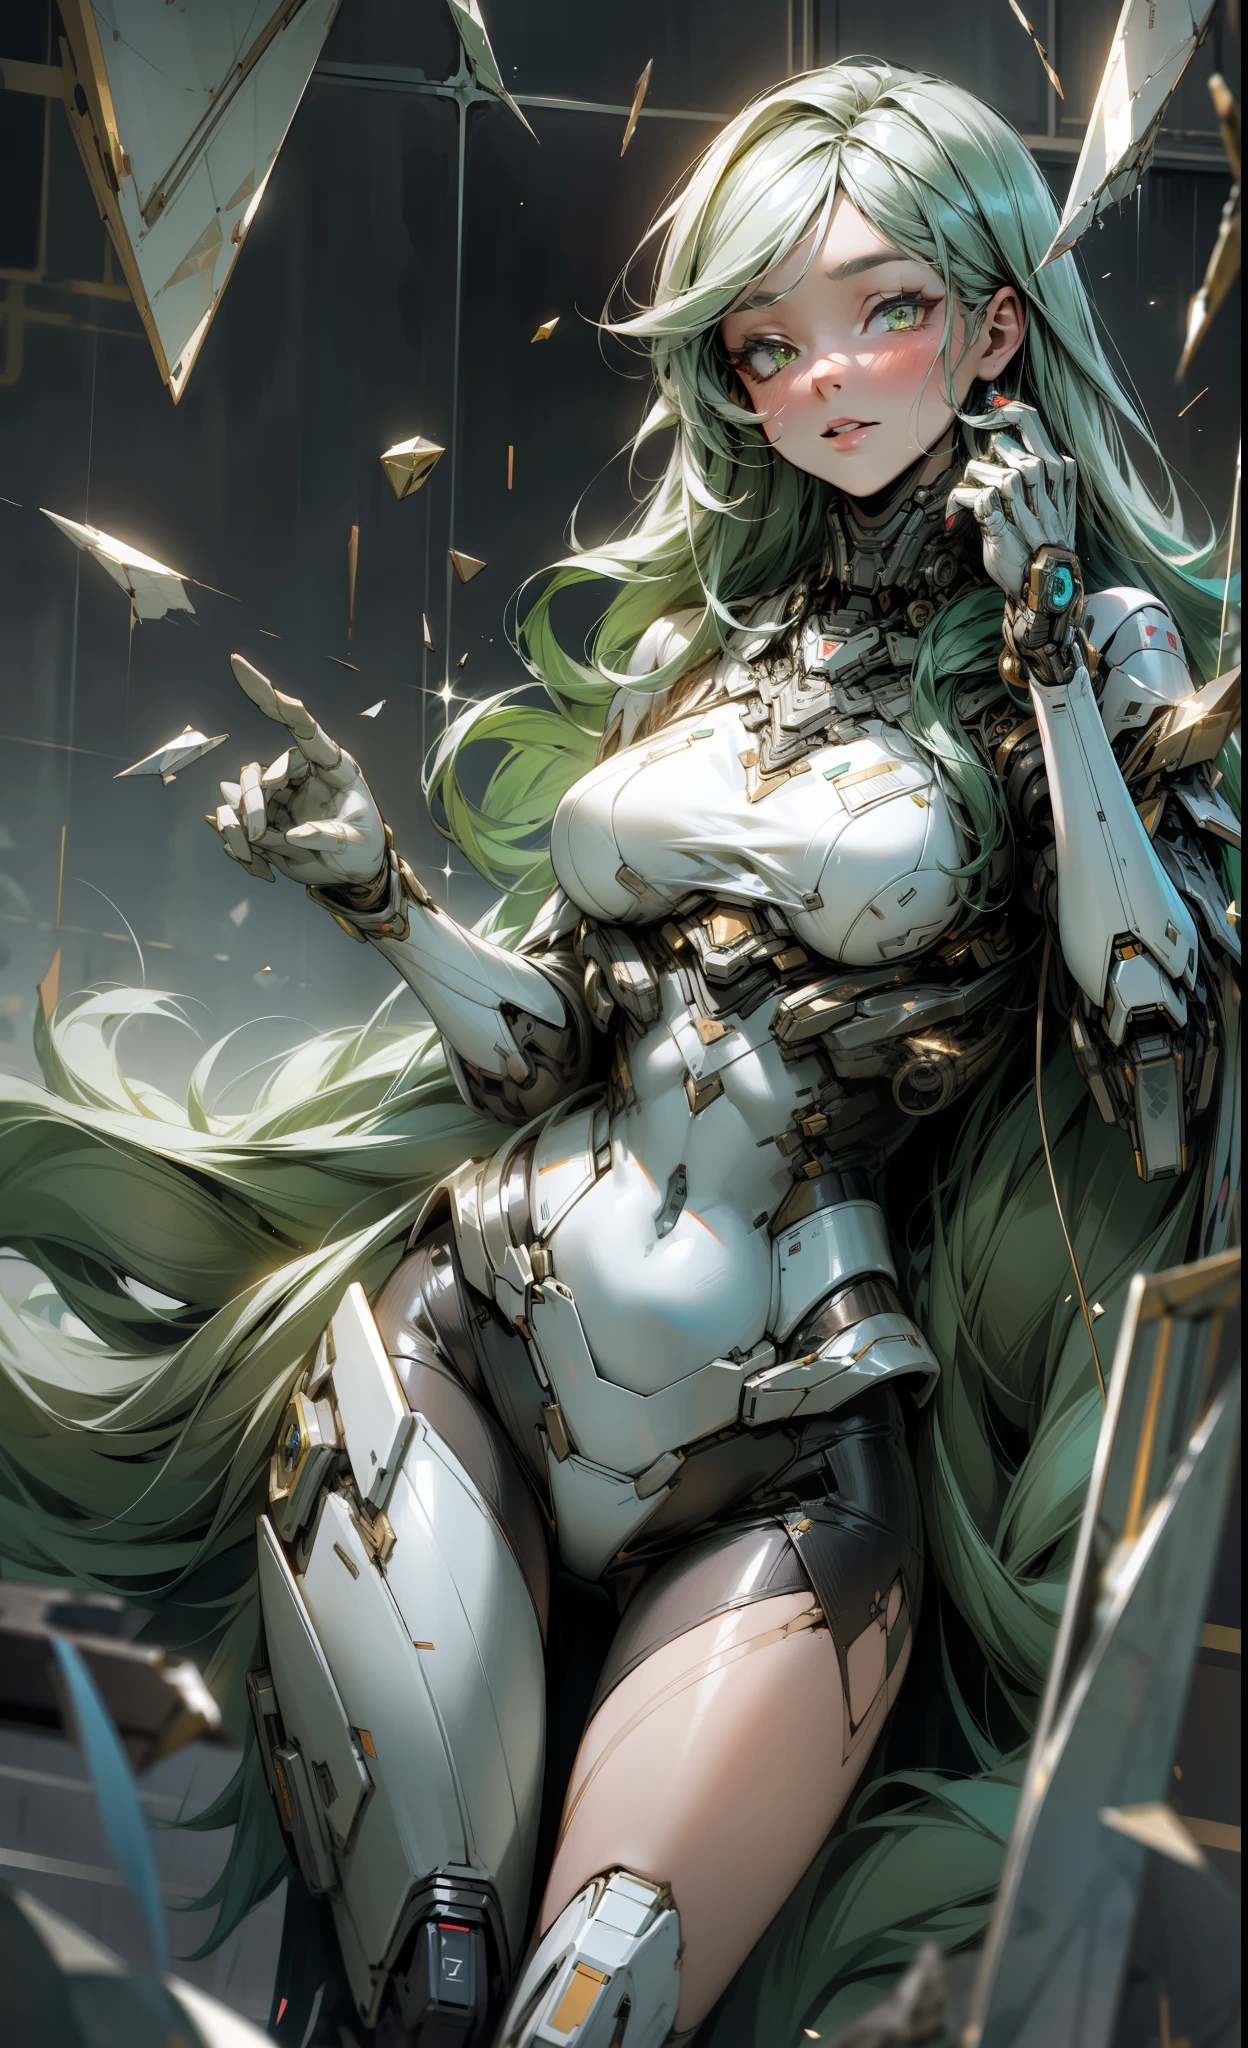 Best quality, masterpiece, highres, broken shards of glass, reflective, glitter, cool egdy, woman, long hair, sexy, intricate, cinematic, macha, robotic, futuristic, advanced, perfect female anatomy